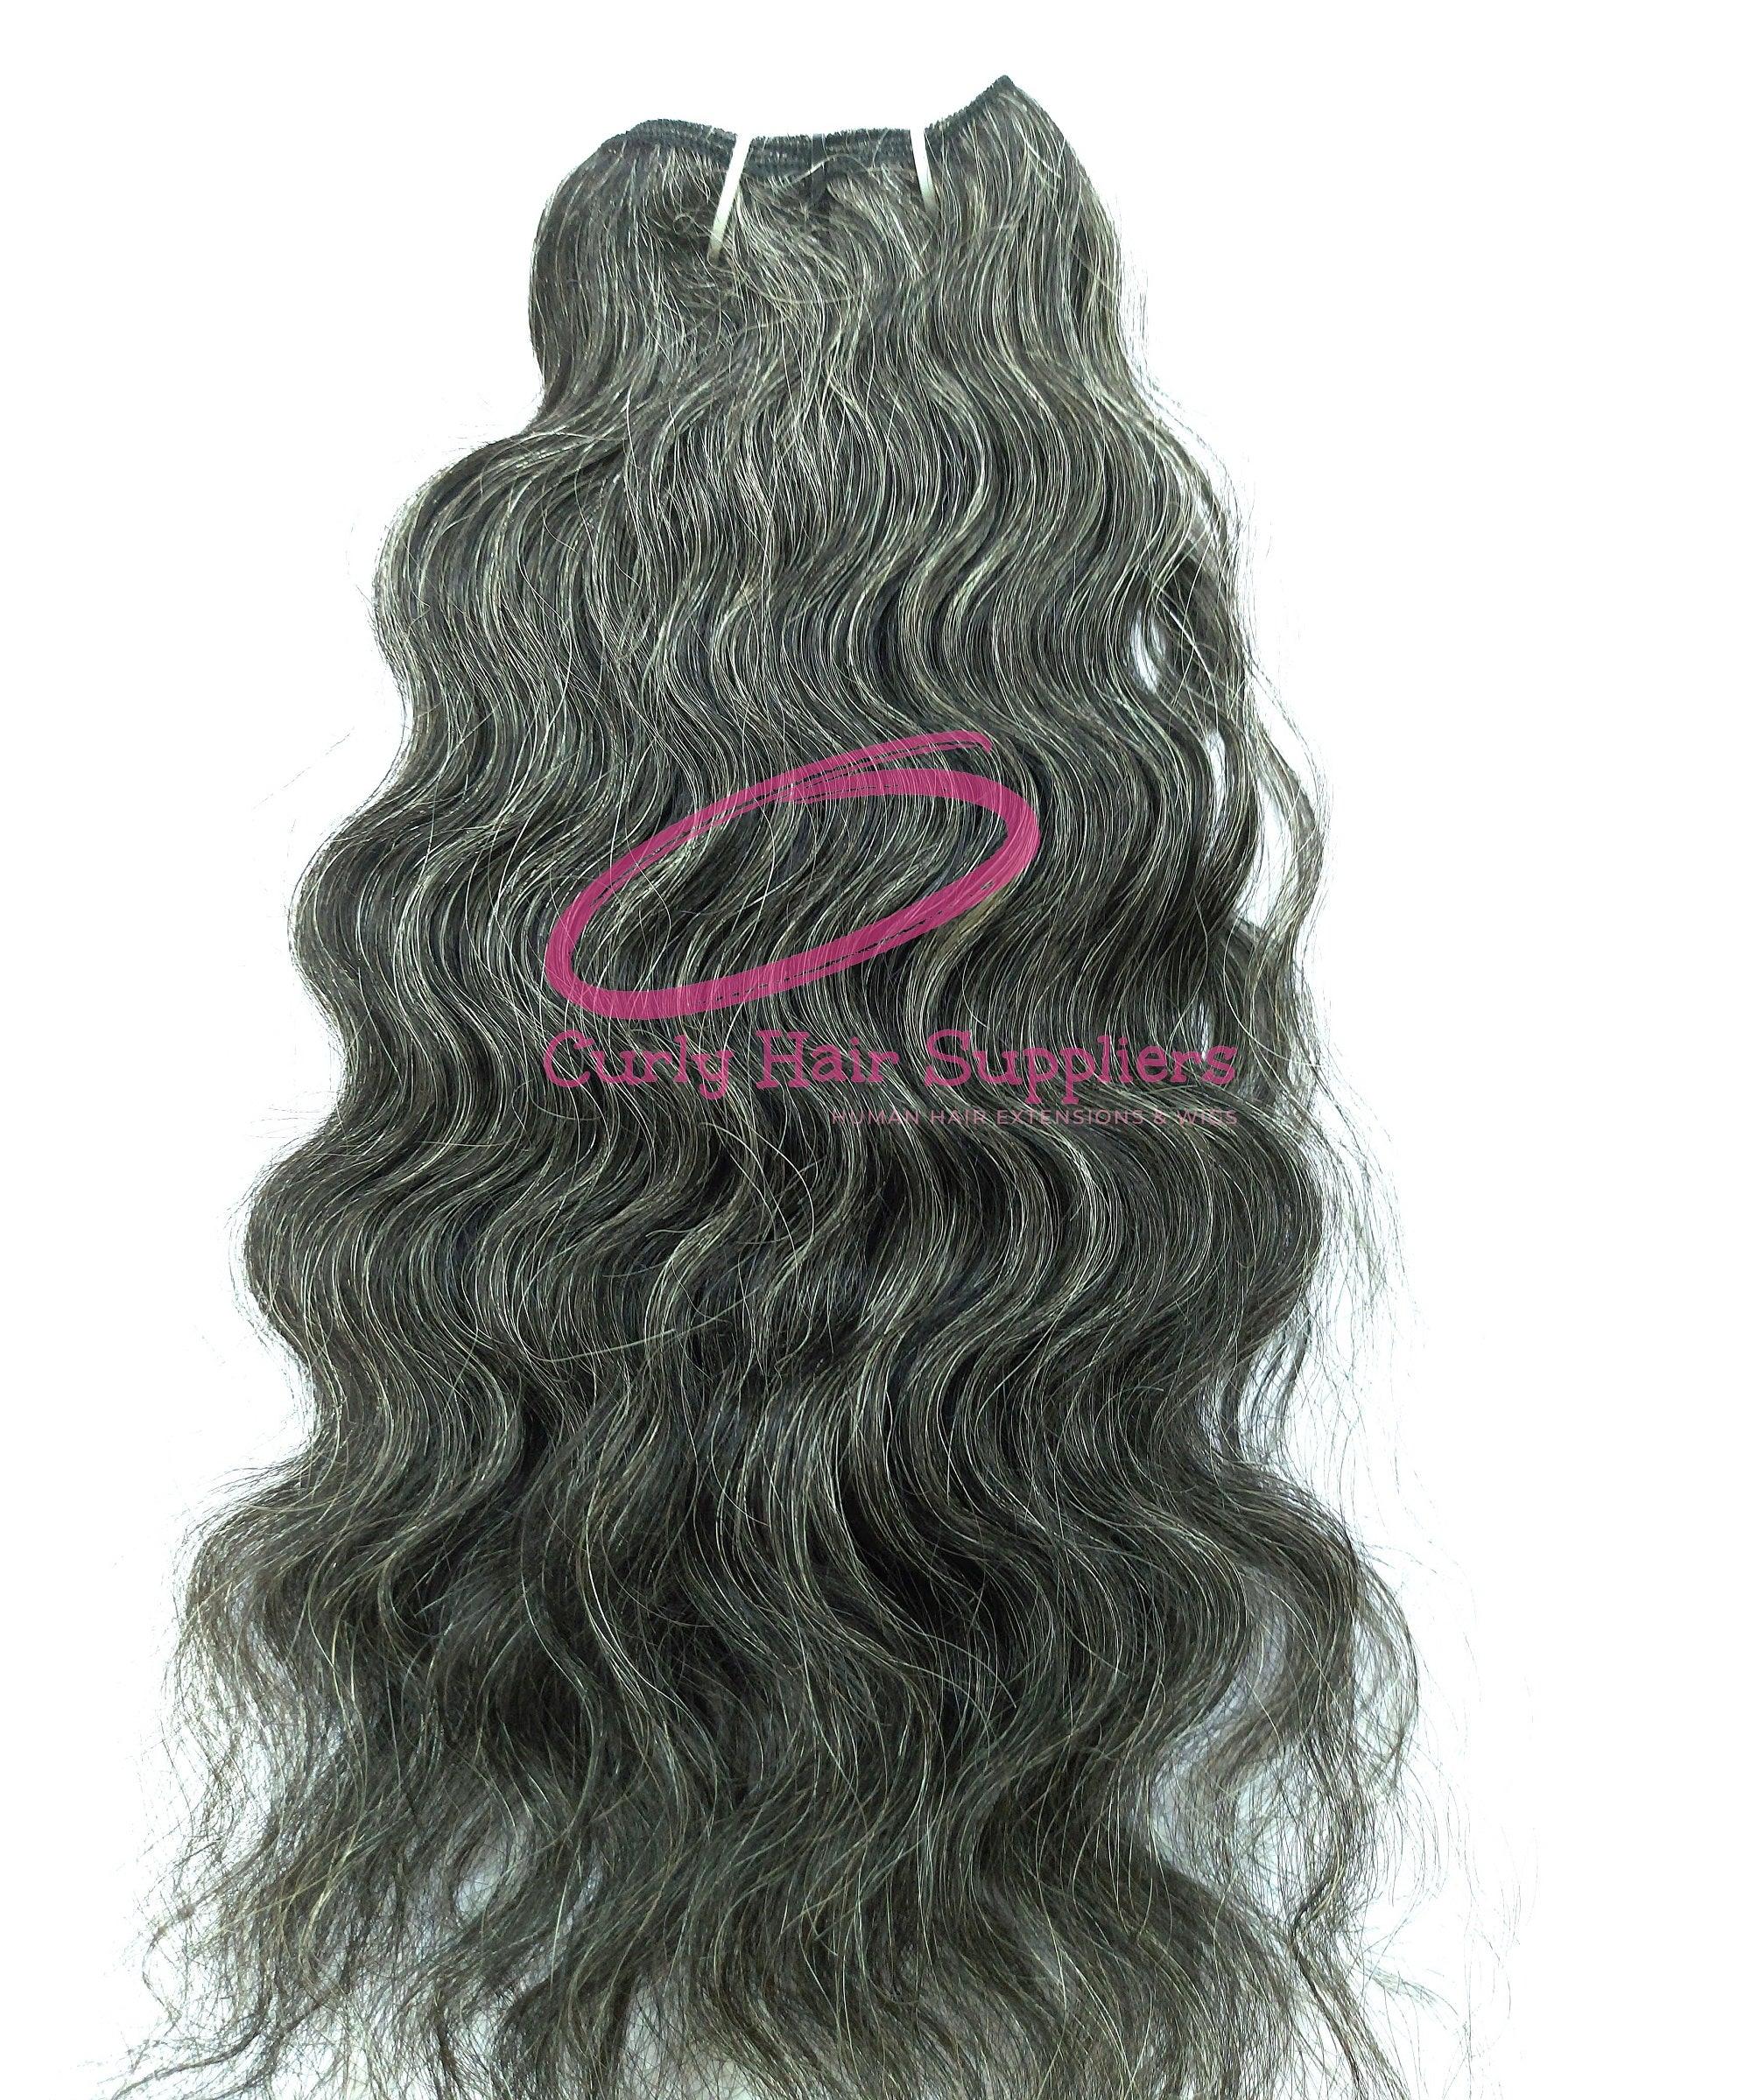 Natural One Donor Grey curly human hair extensions